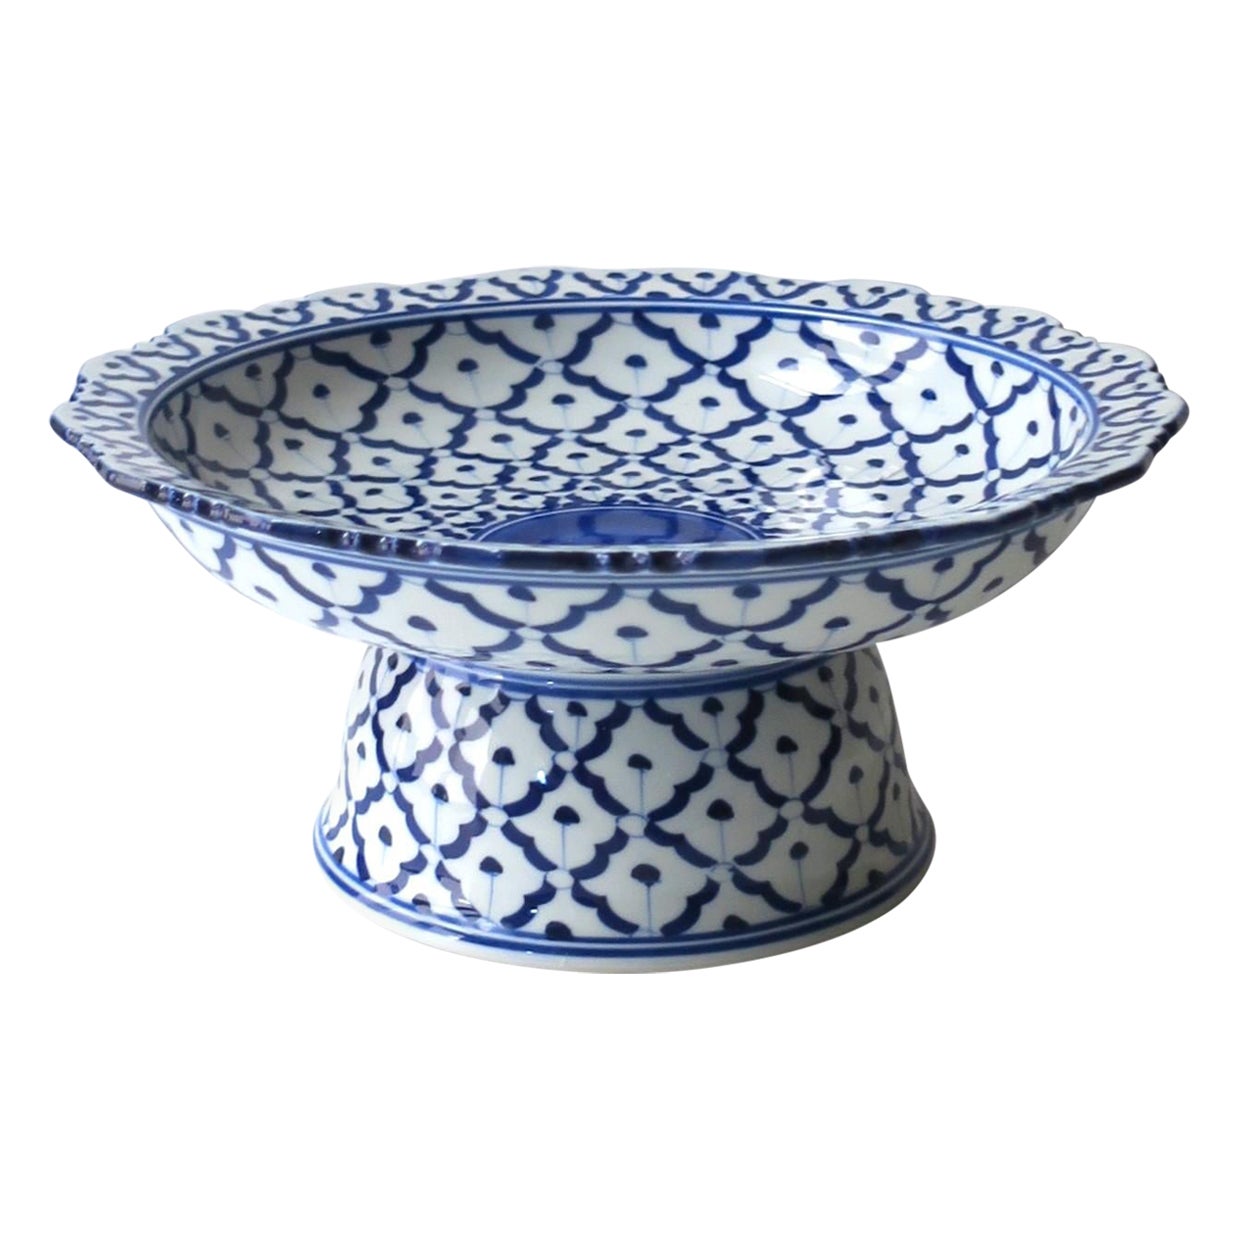 Blue and White Ceramic Centerpiece Bowl Compote  For Sale